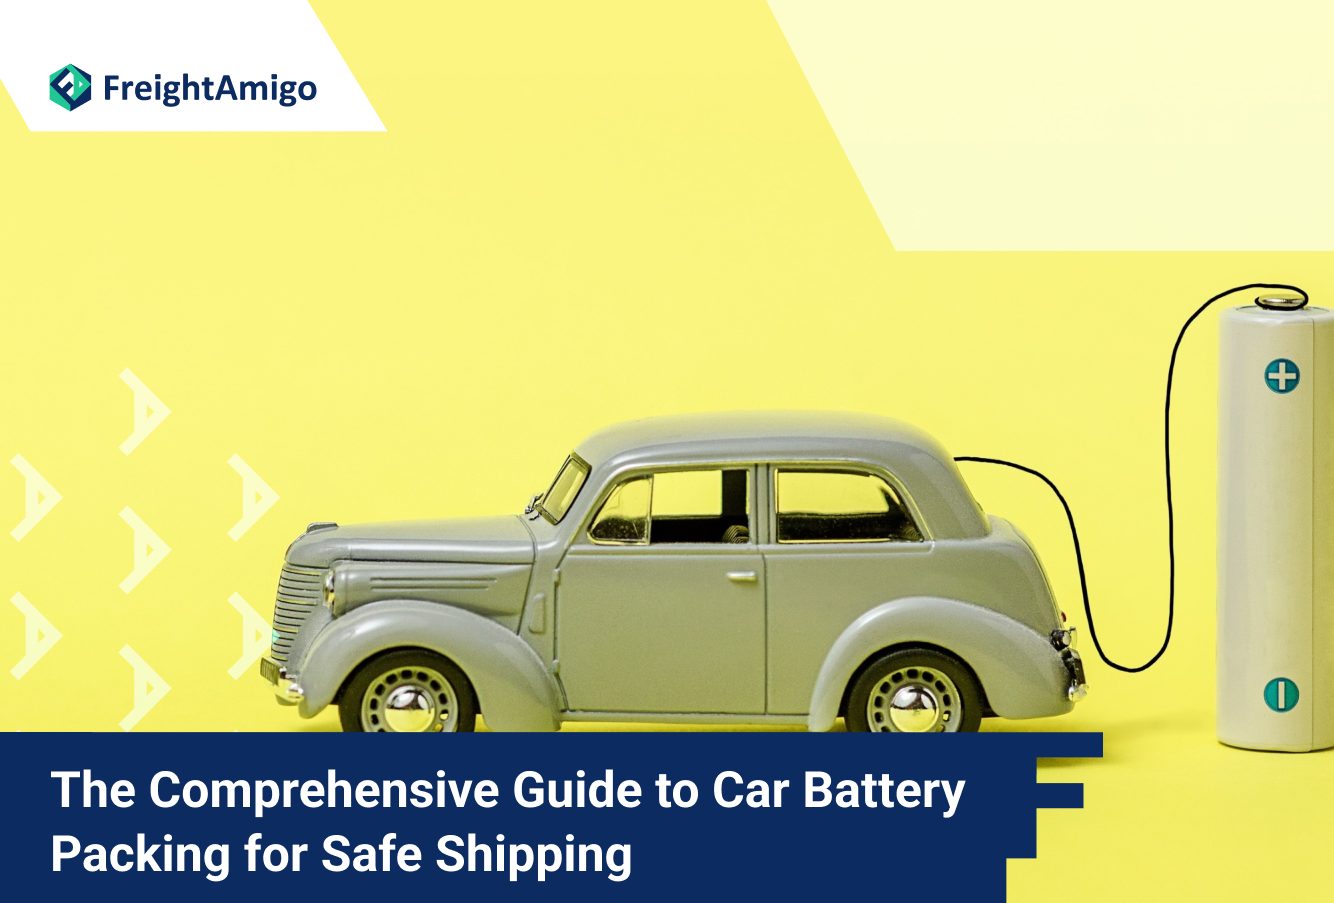 The Comprehensive Guide to Car Battery Packing for Safe Shipping